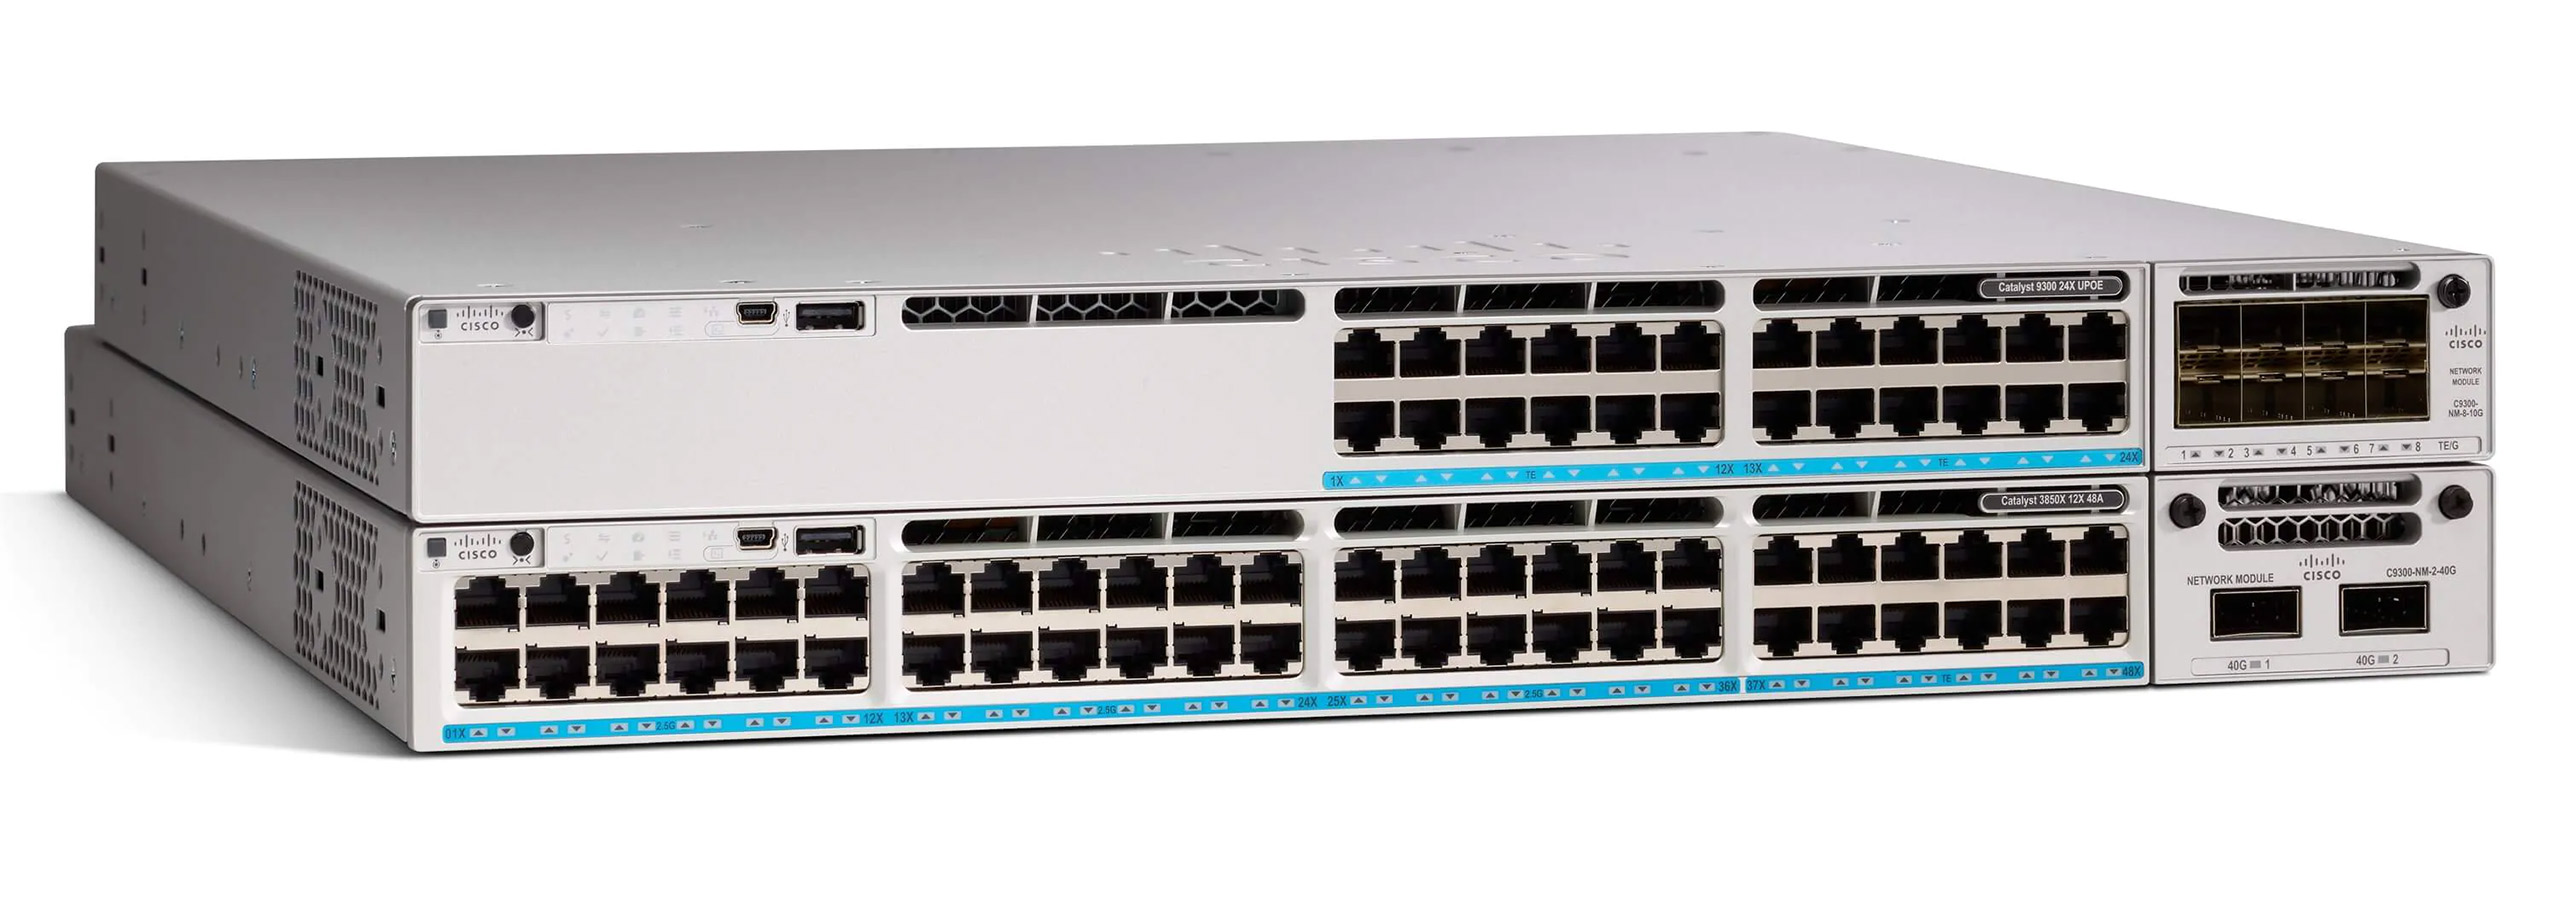 catalyst 9300 series switches